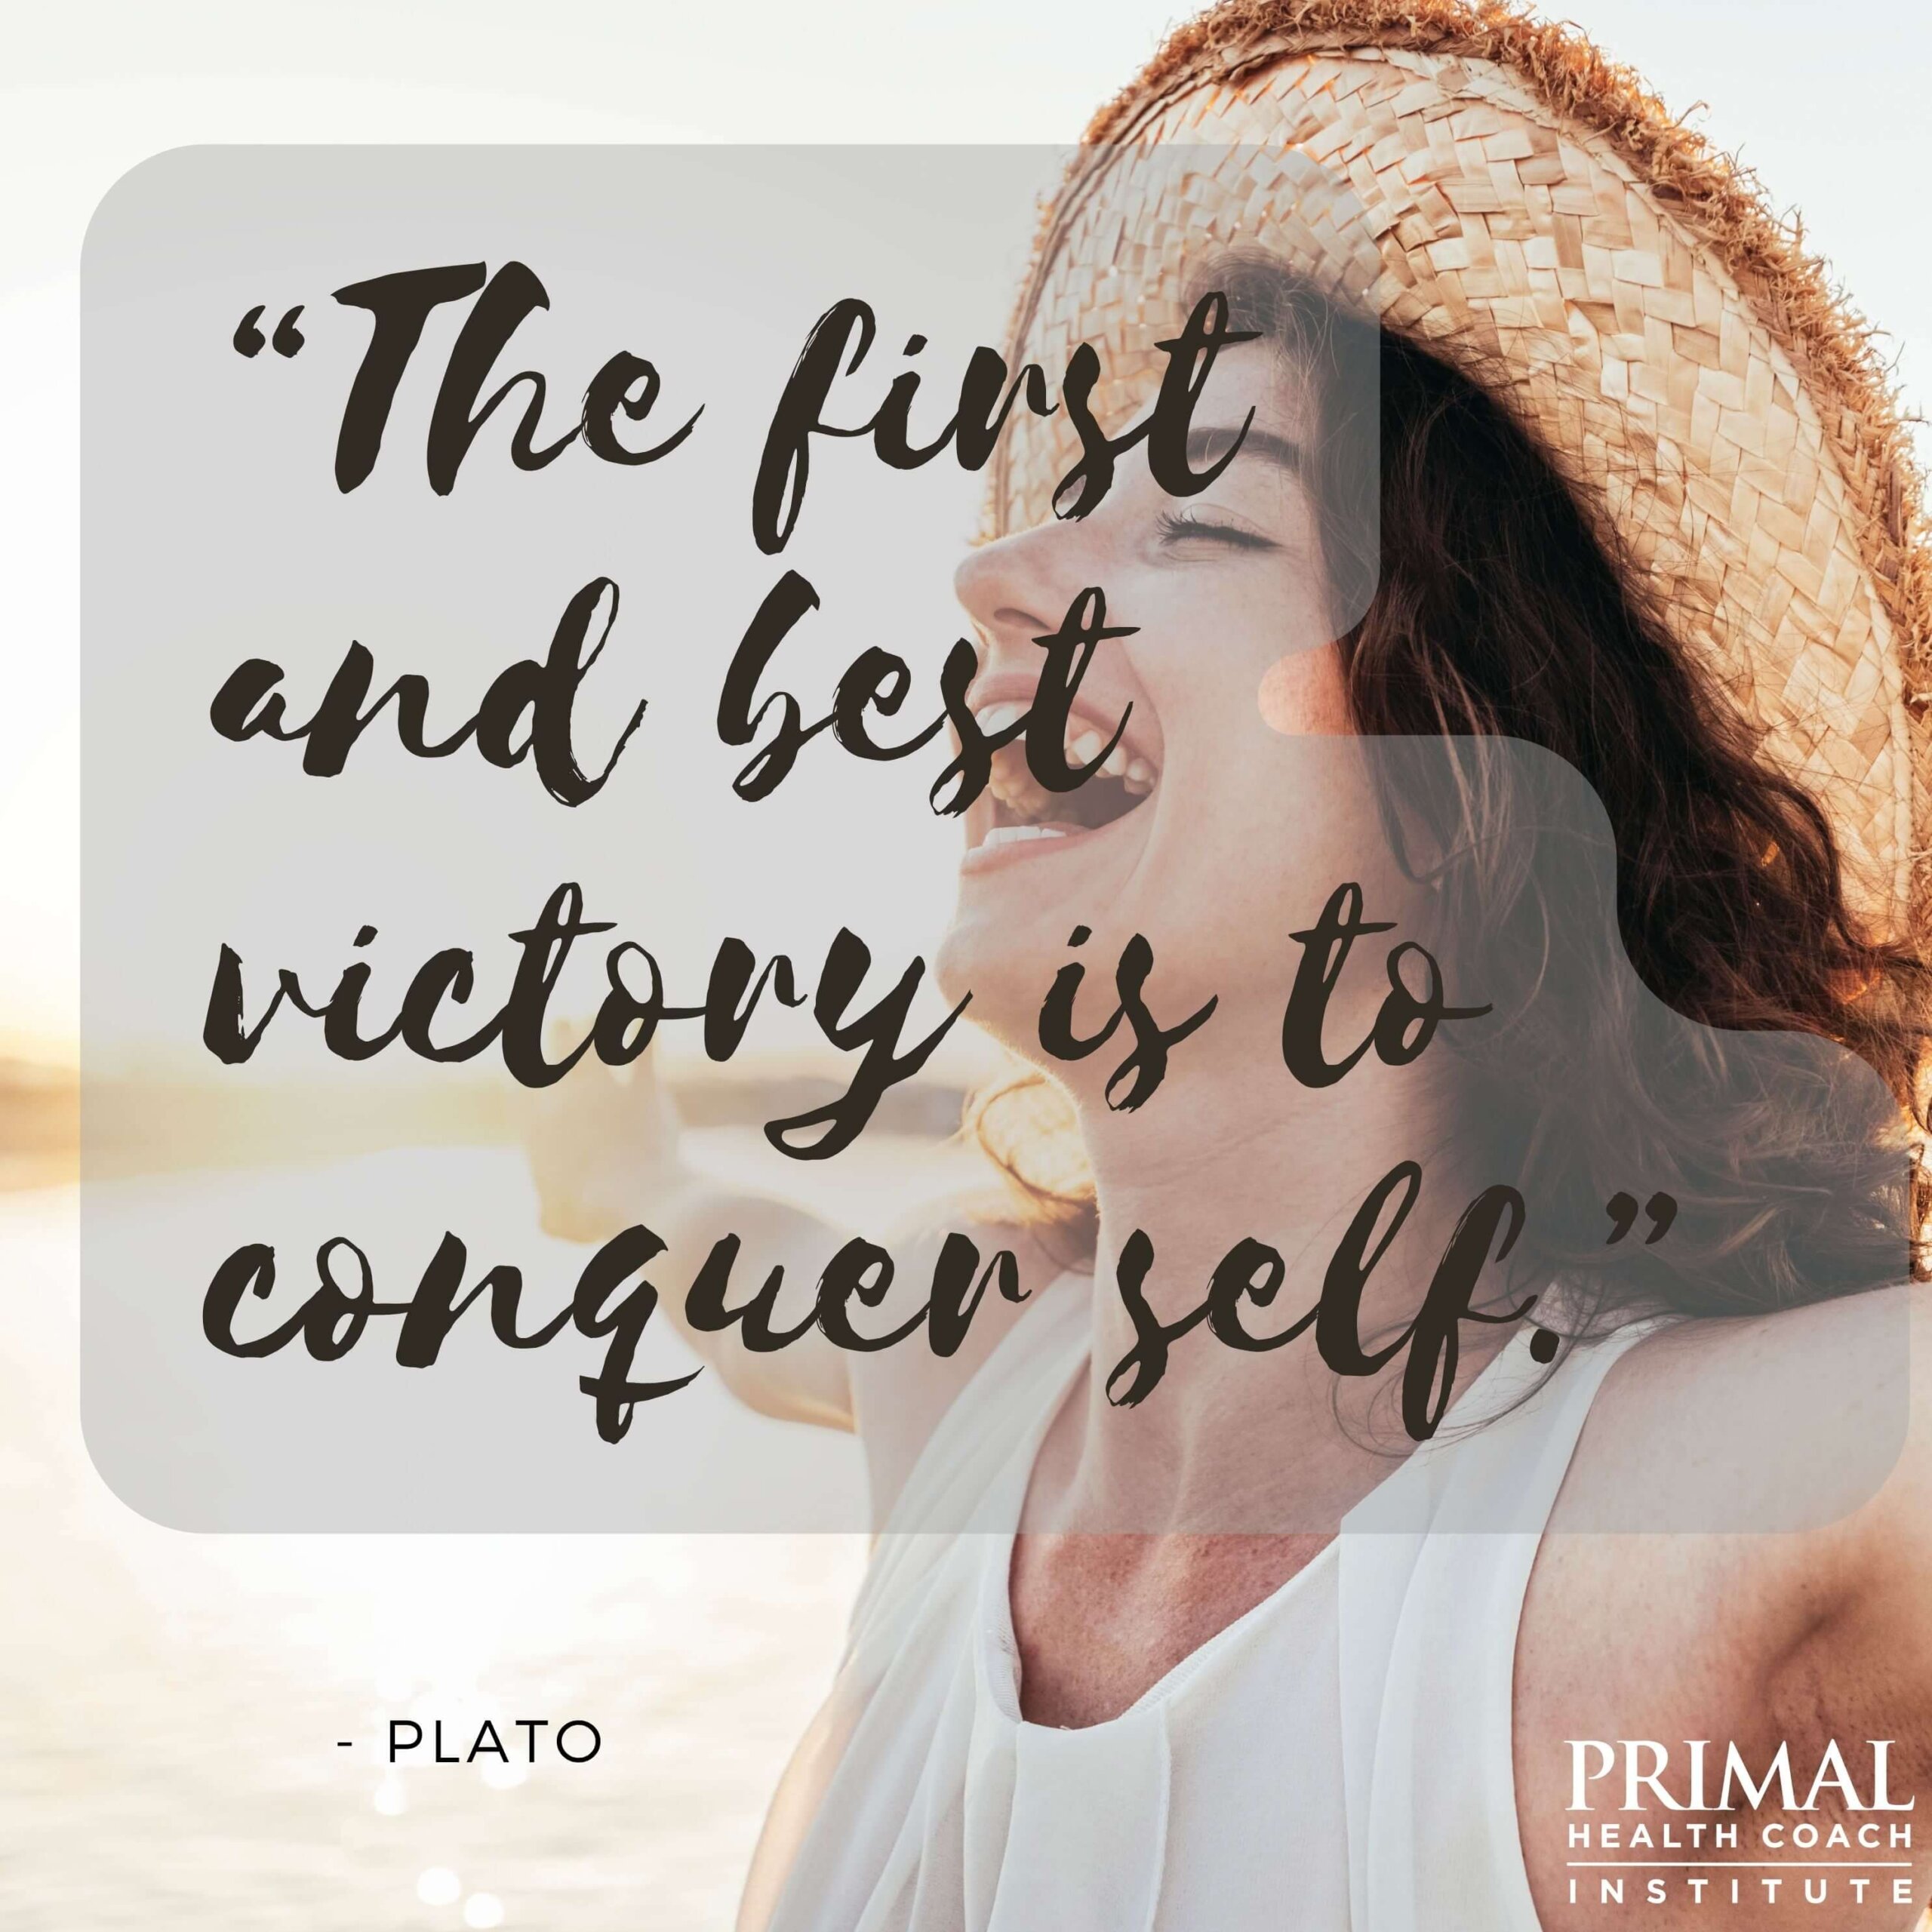 “The first and best victory is to conquer self.” - Plato